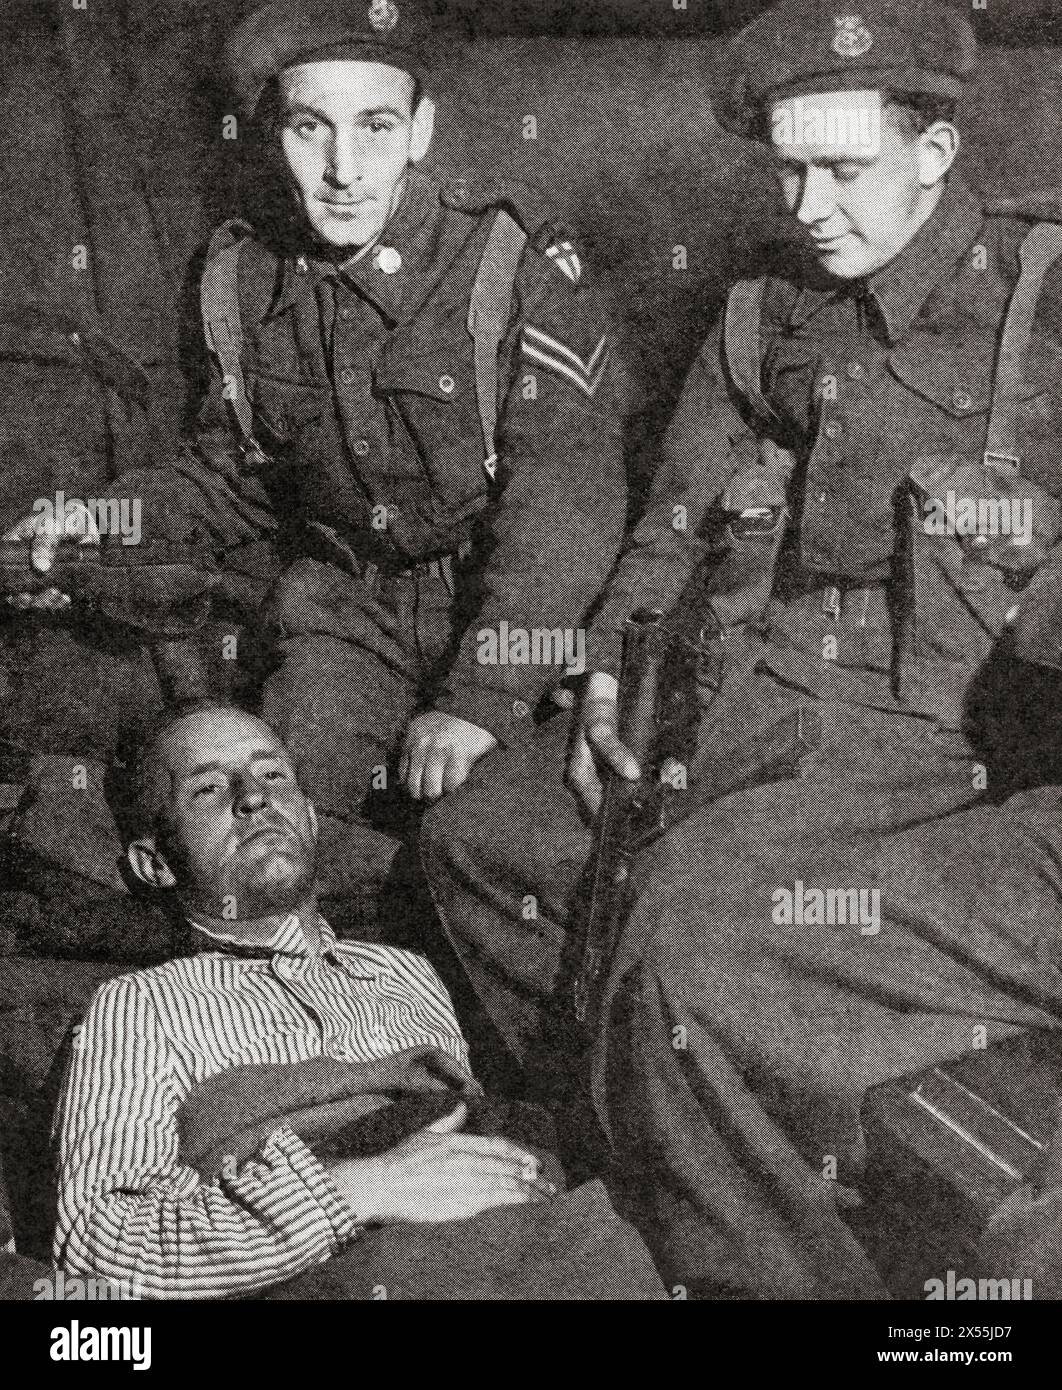 Lord Haw Haw just after his capture.  William Brooke Joyce, 1906 – 1946, nicknamed Lord Haw-Haw.  American-born fascist, Nazi propaganda broadcaster during the Second World War and member of Oswald Mosley's British Union of Fascists (BUF).  From The War in Pictures, Sixth Year. Stock Photo